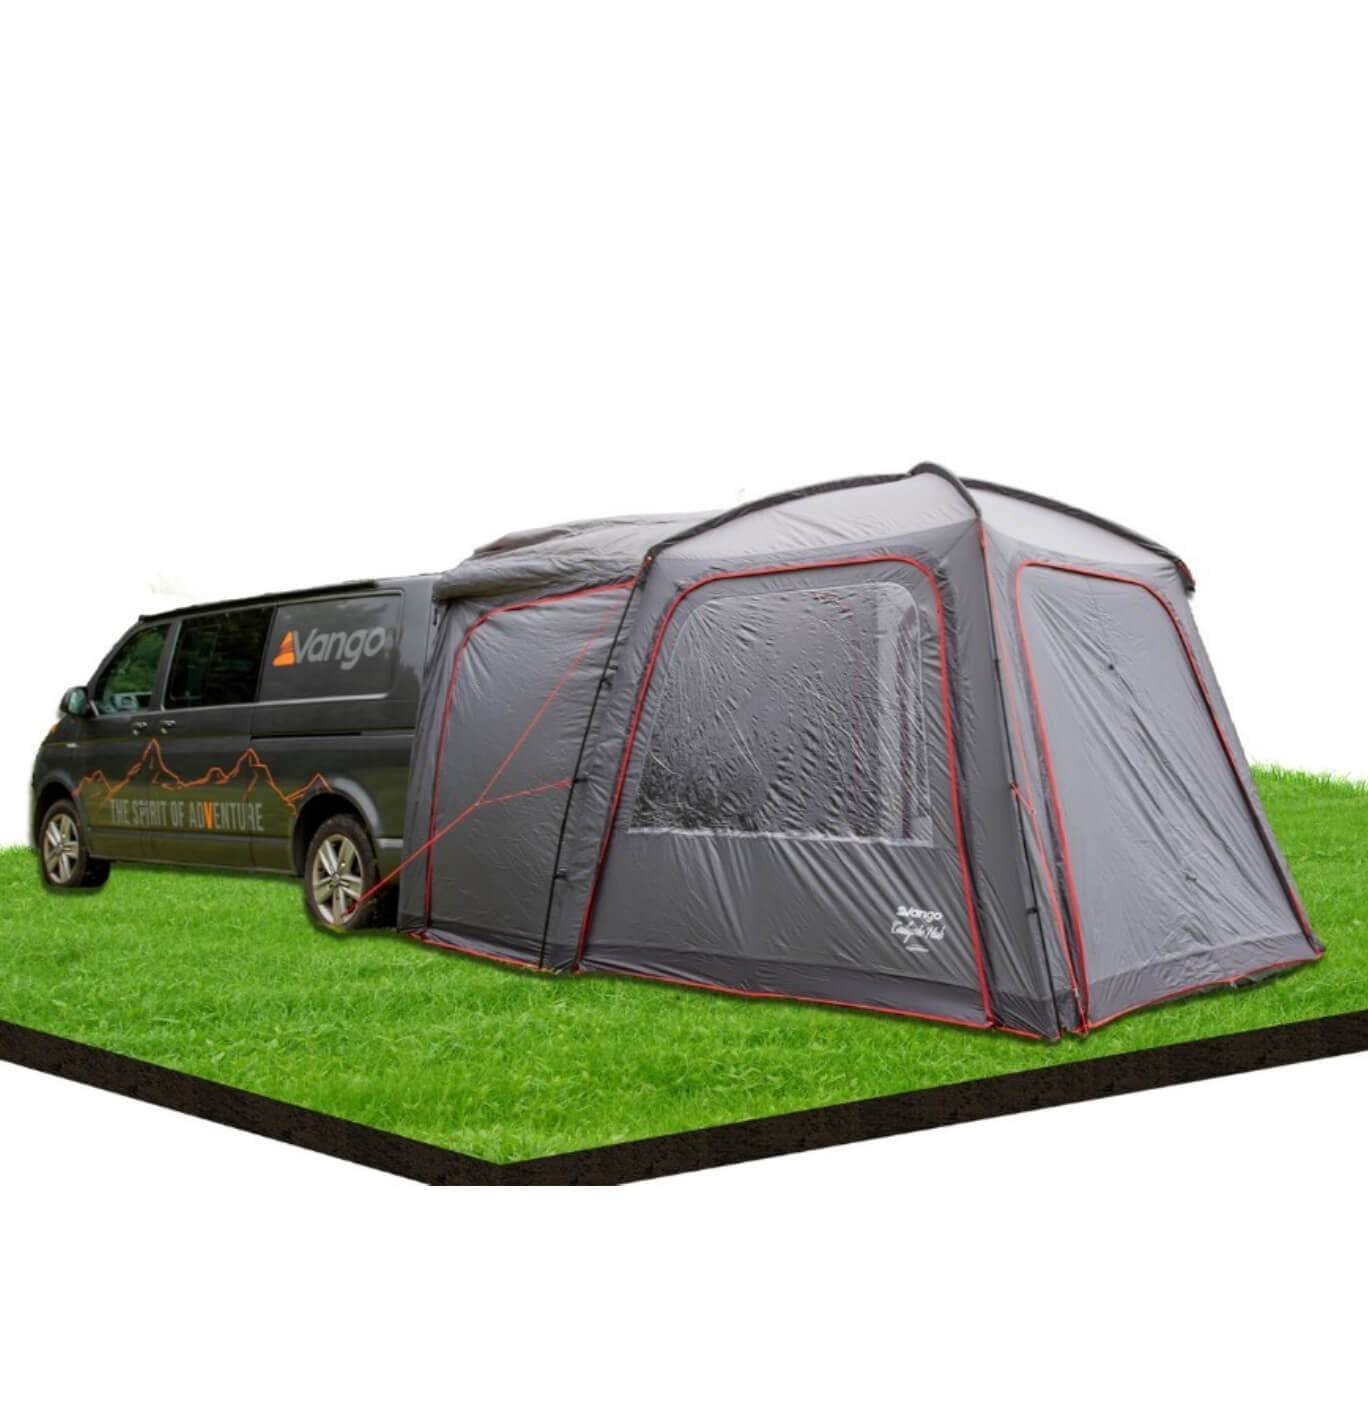 Magnetic Awning for Rear of Vehicles with Barn Doors